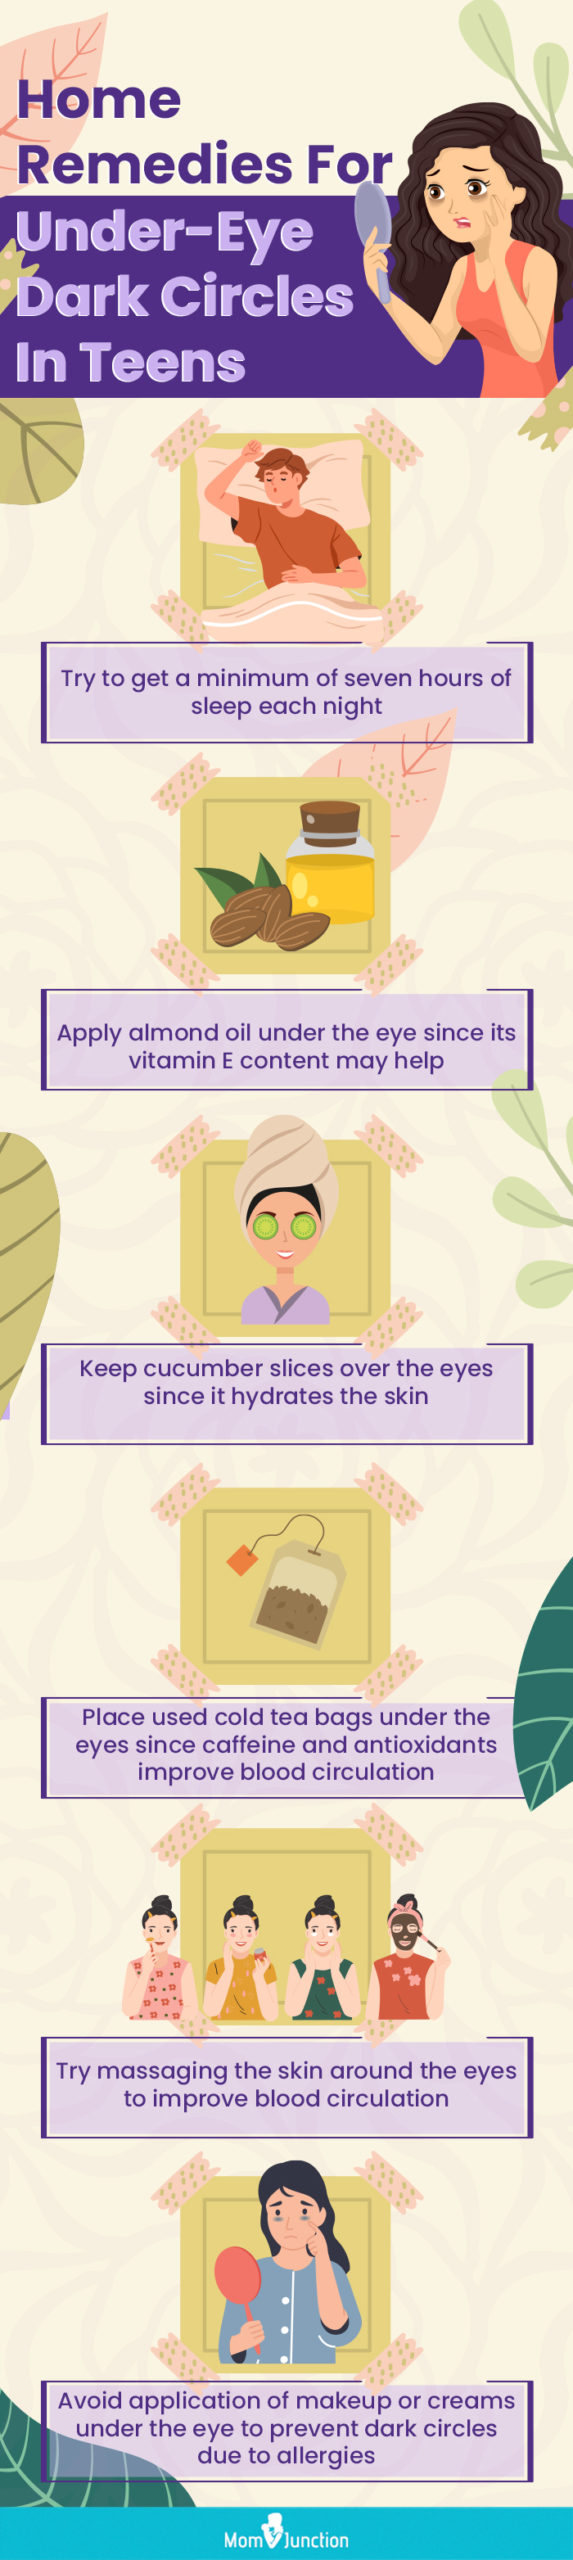 home remedies for under eye dark circles in teens (infographic)